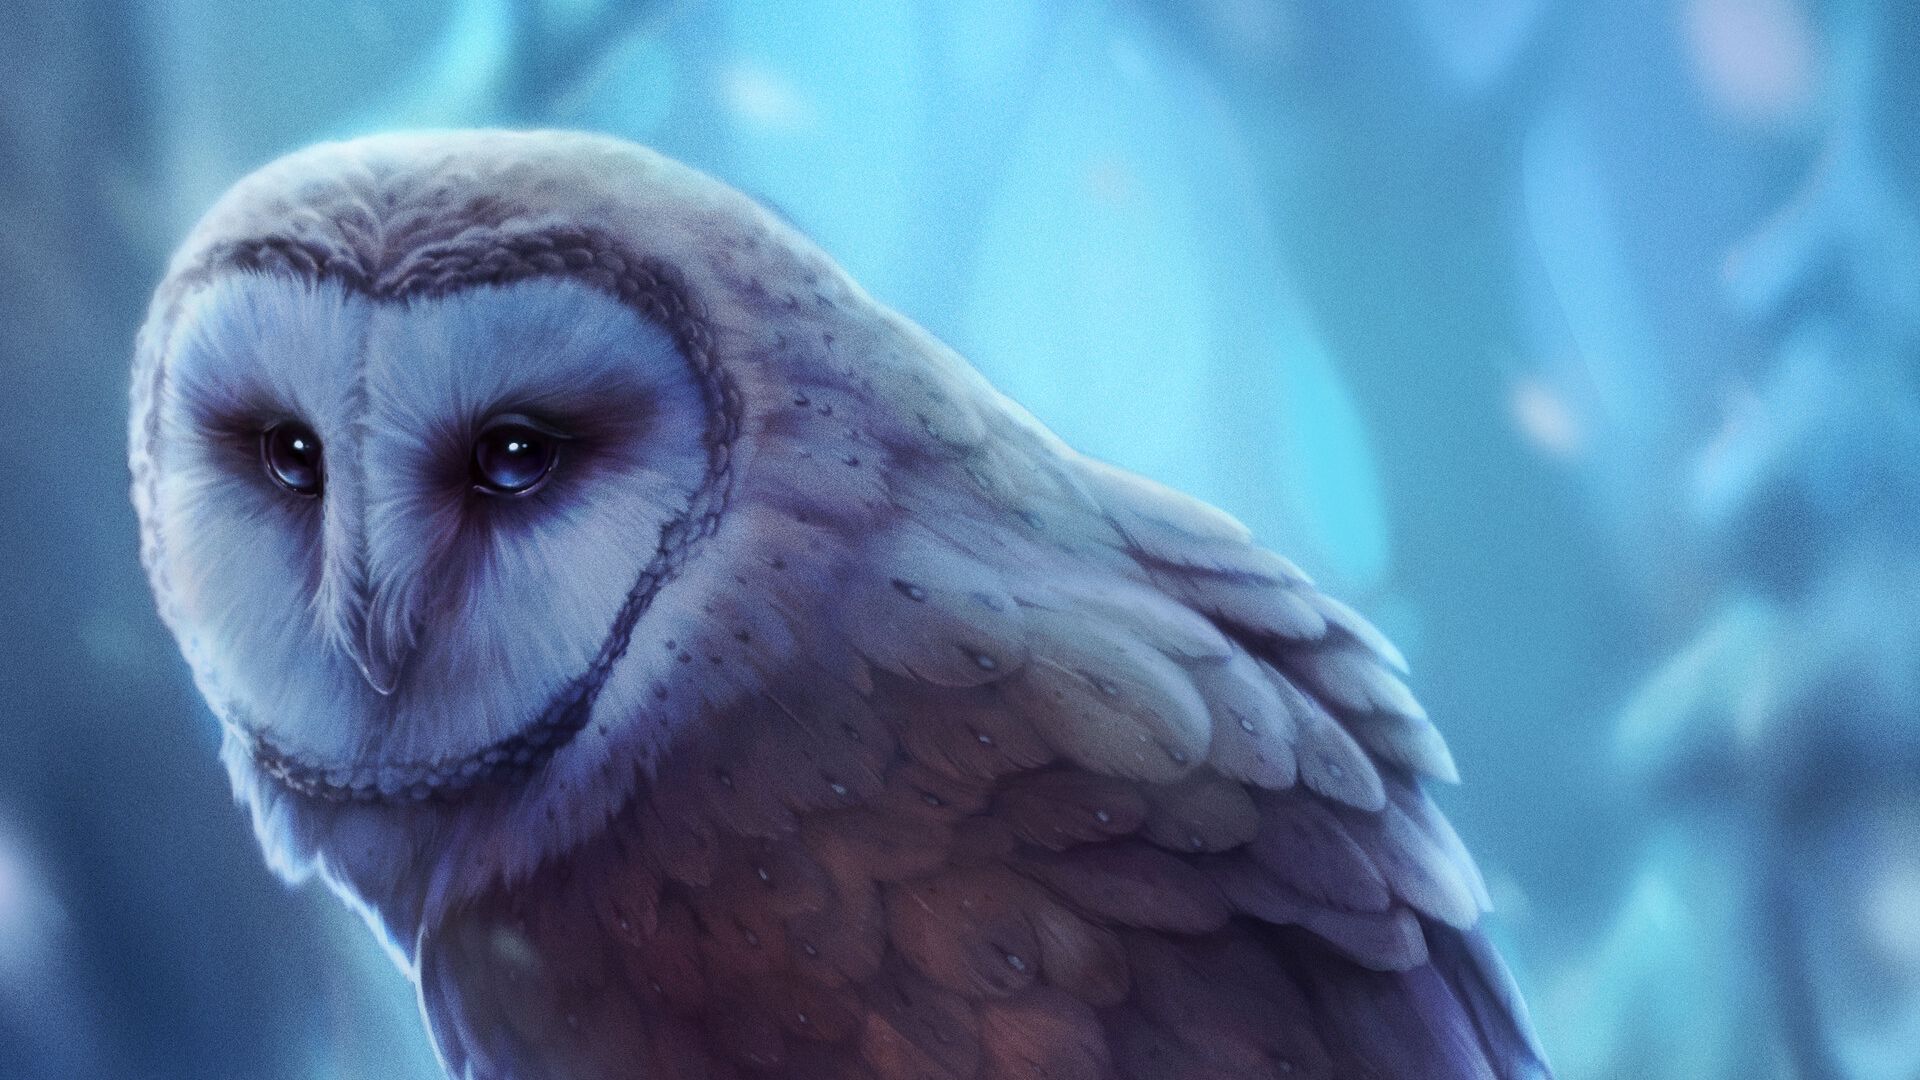 Owl, Bird, Art Wallpapers Download For Your Device (2). 1. Download. 